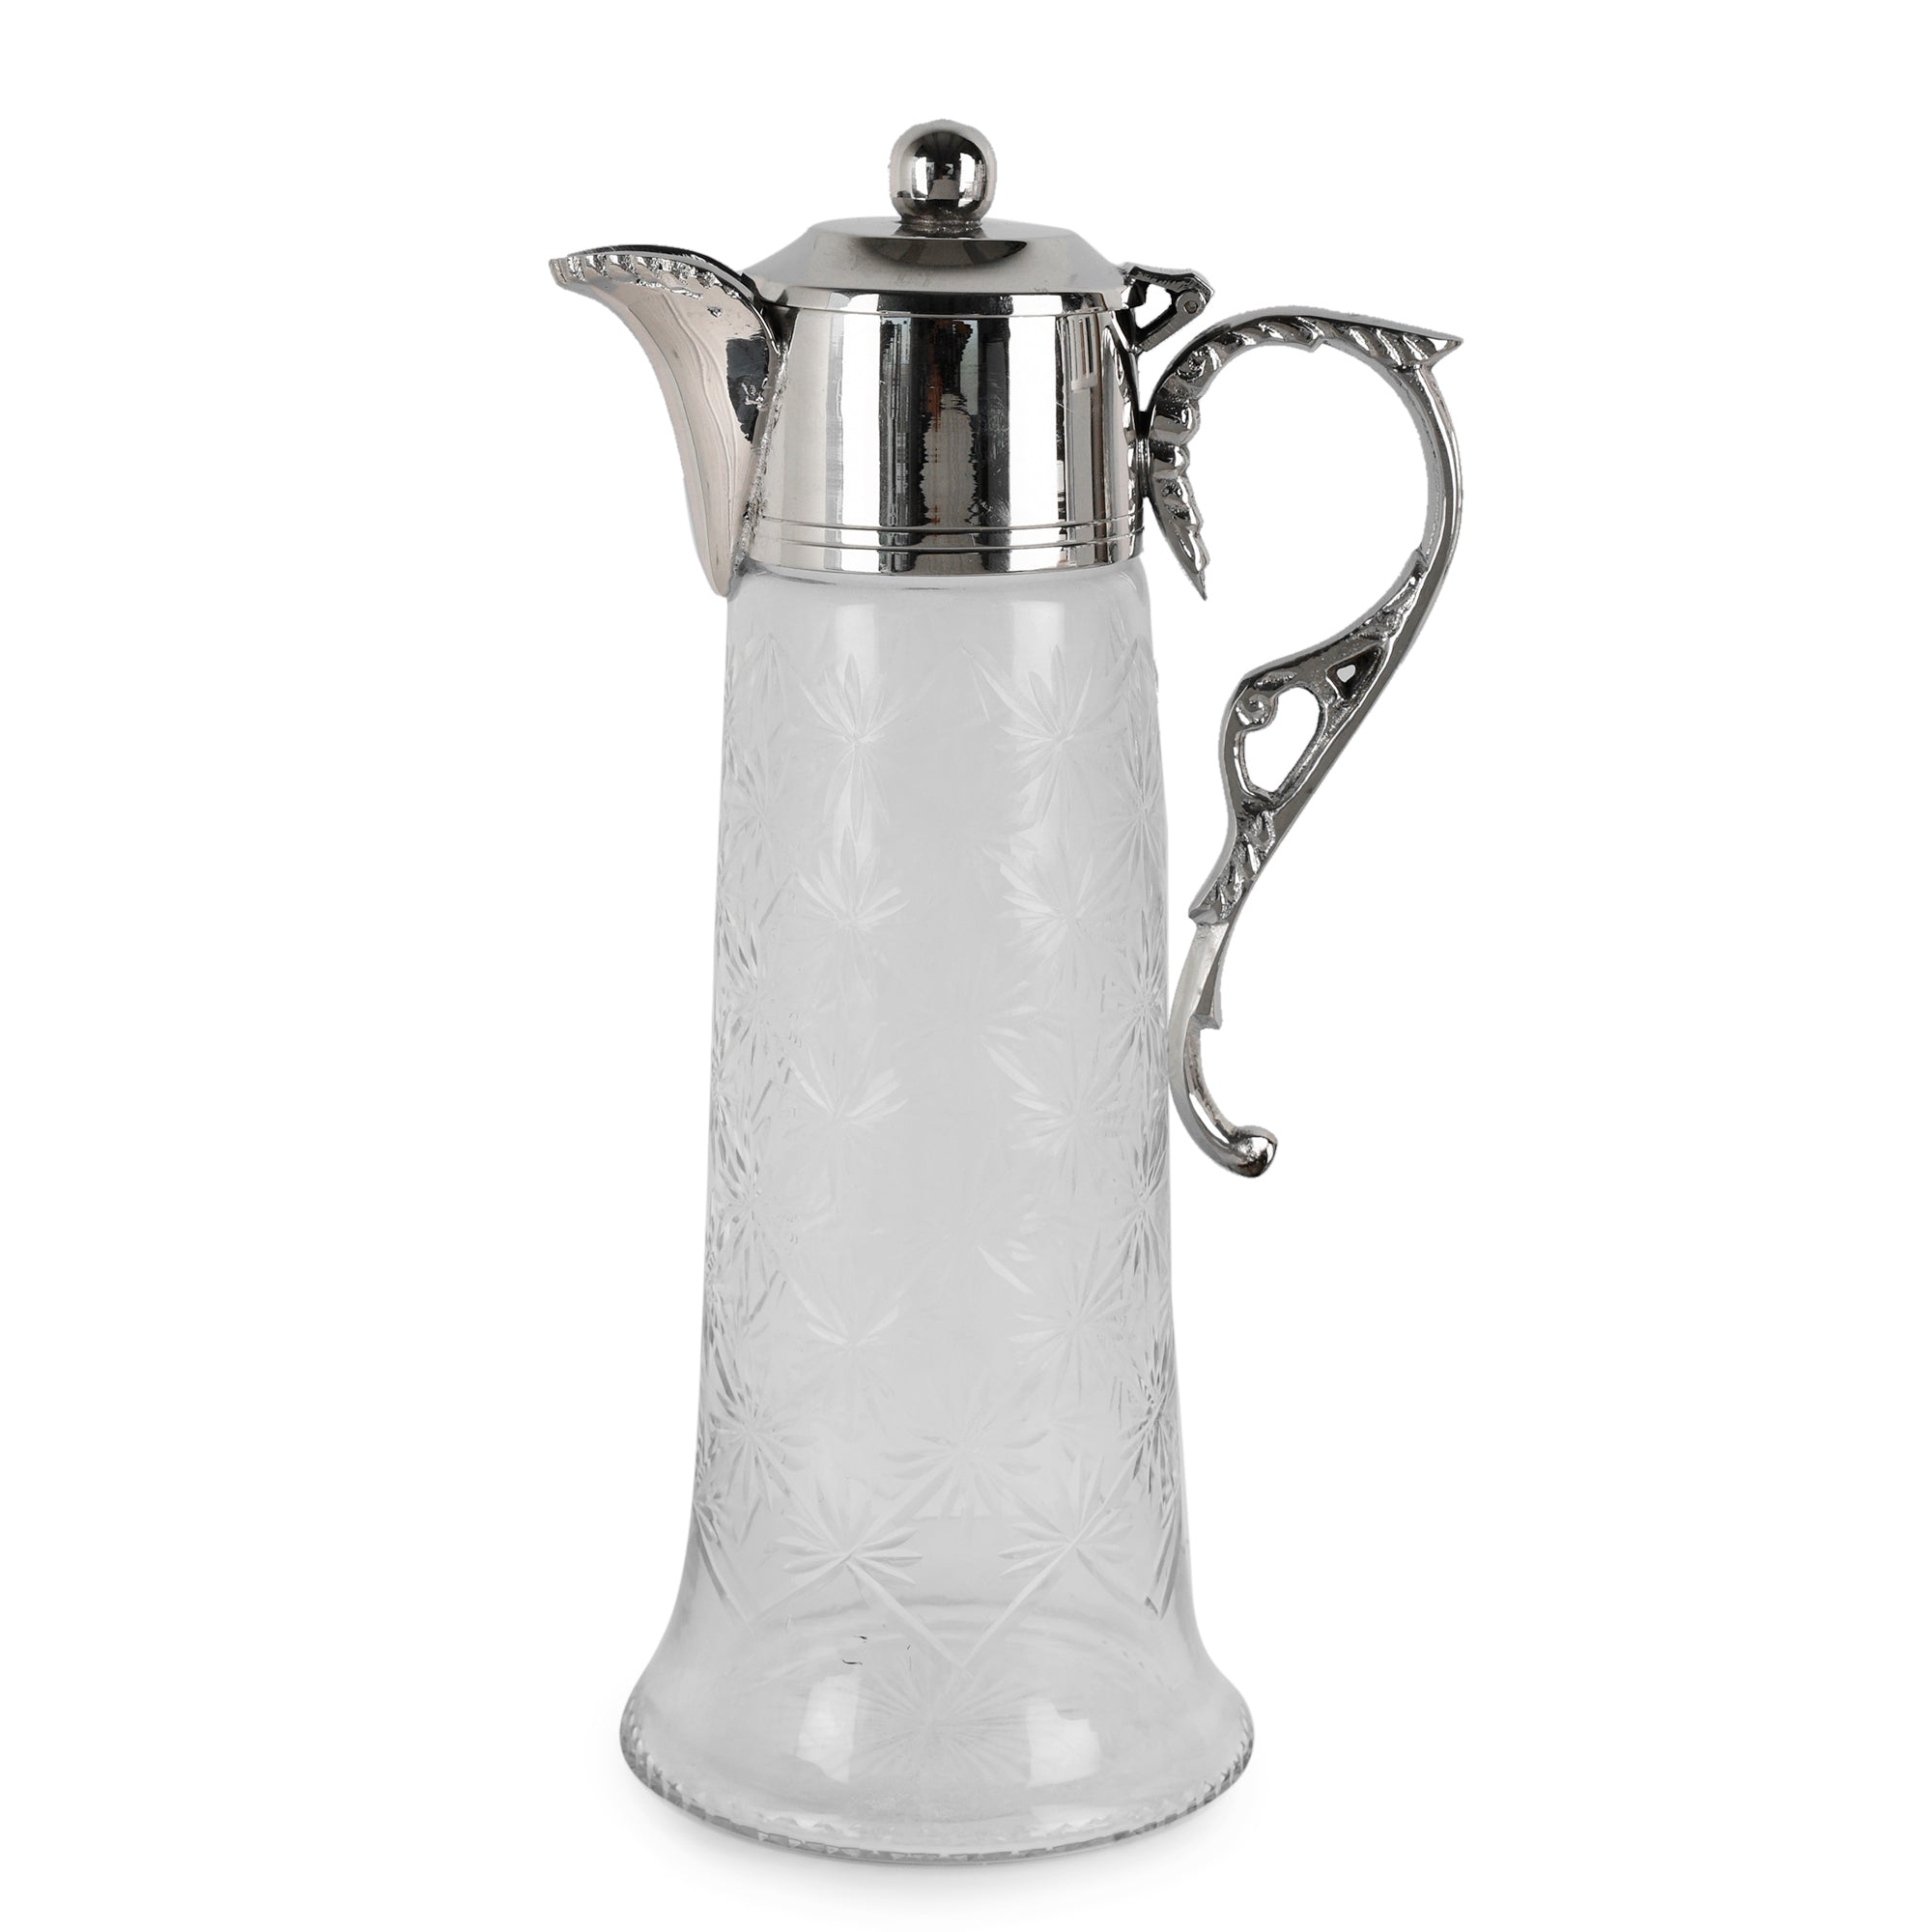 Neer Brass and Glass 14.5 inch Tall Jug - Silver Finish